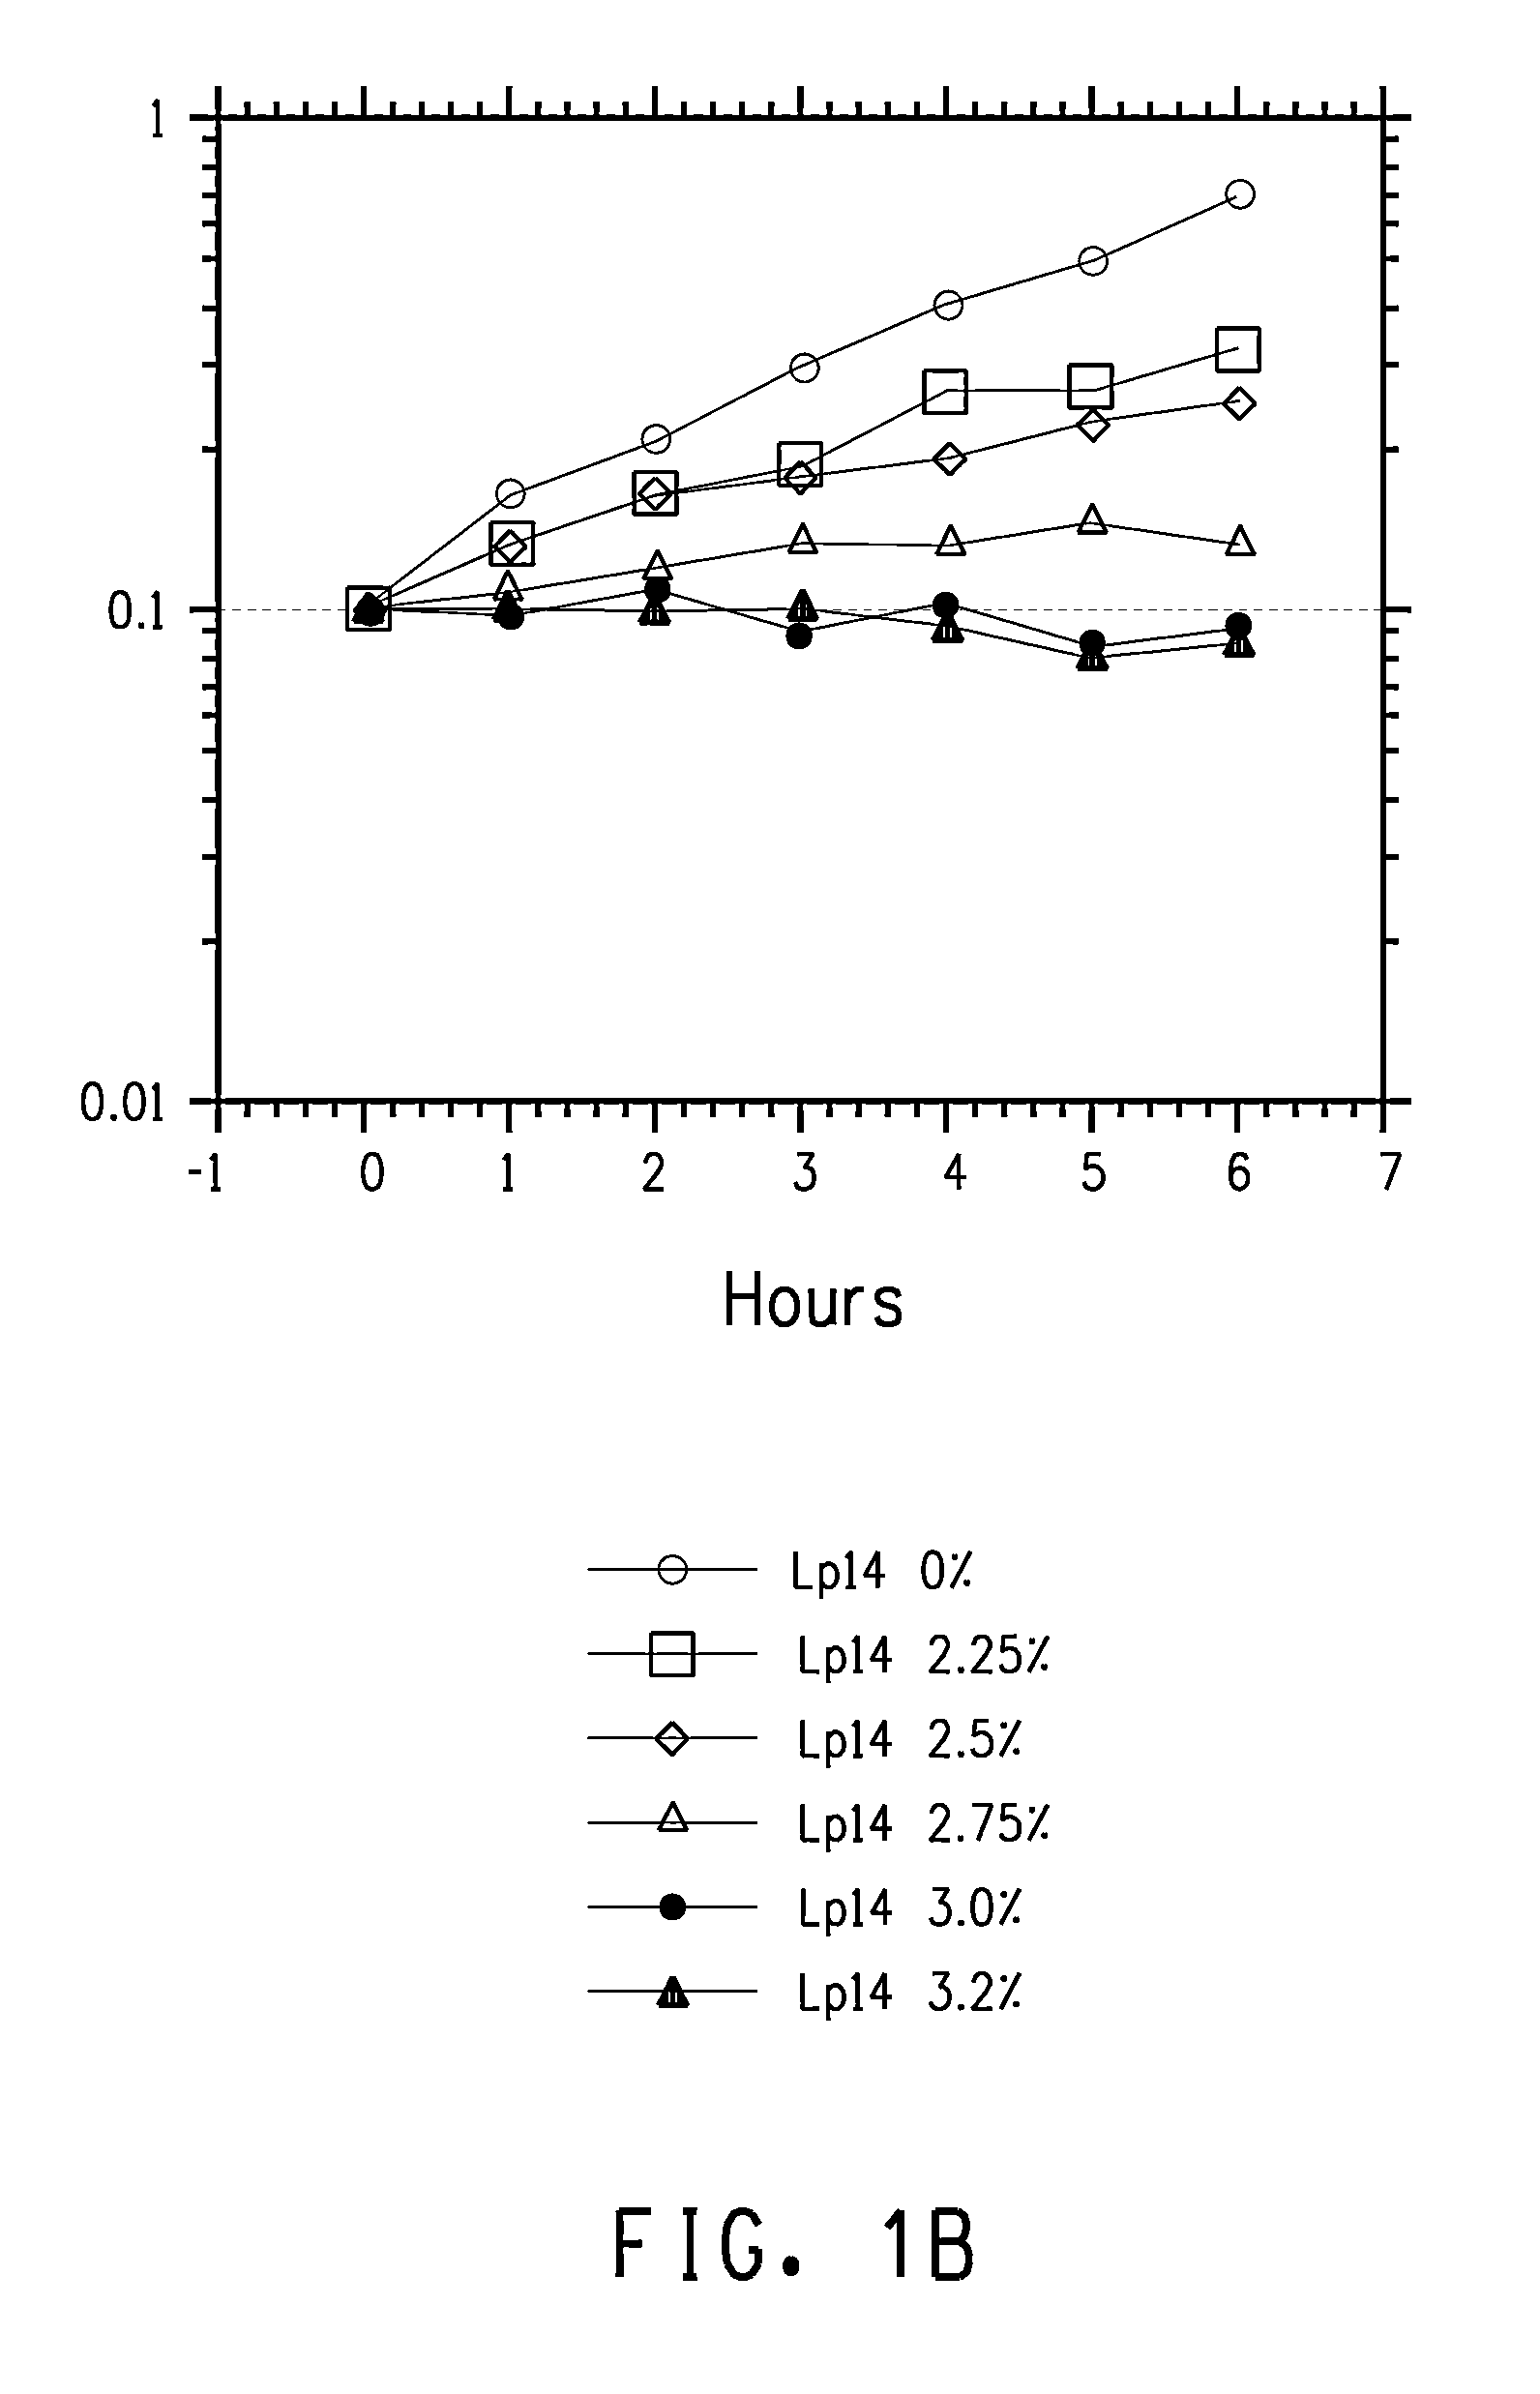 Strain comprising increased expression of a CFA coding region for butanol production